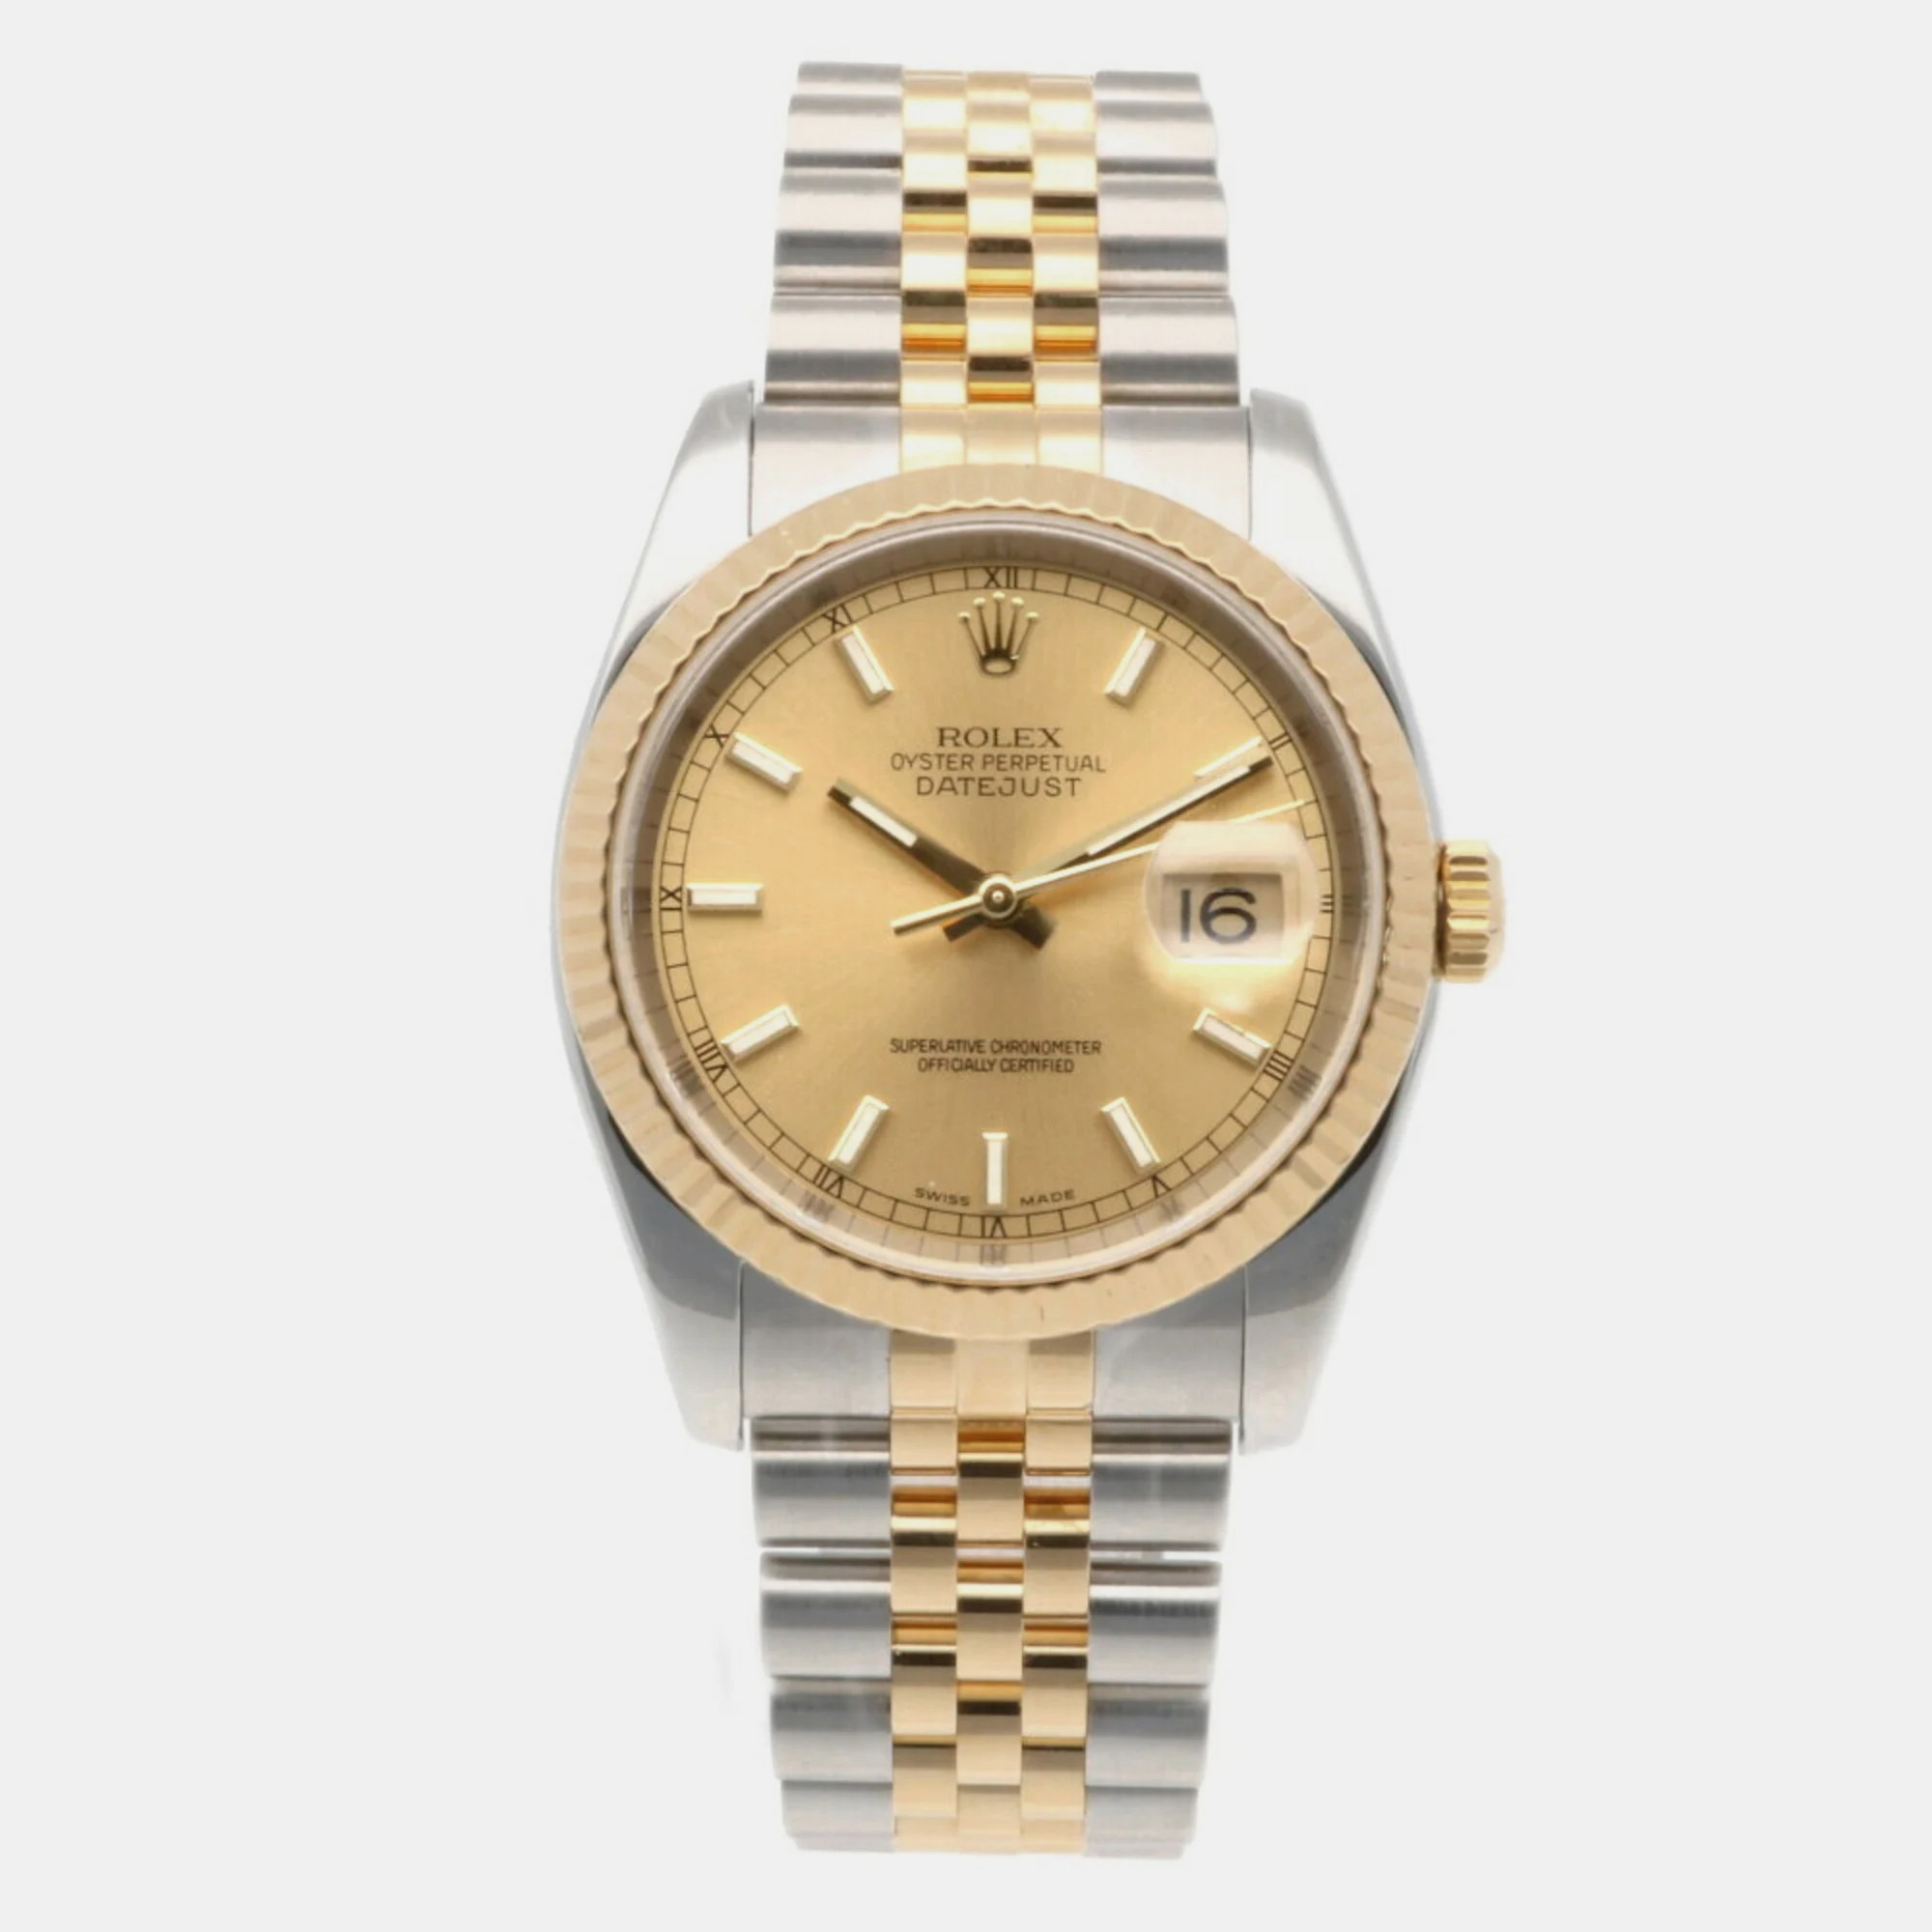 Rolex Champagne 18k Yellow Gold And Stainless Steel Datejust 116233 Automatic Men's Wristwatch 36 Mm